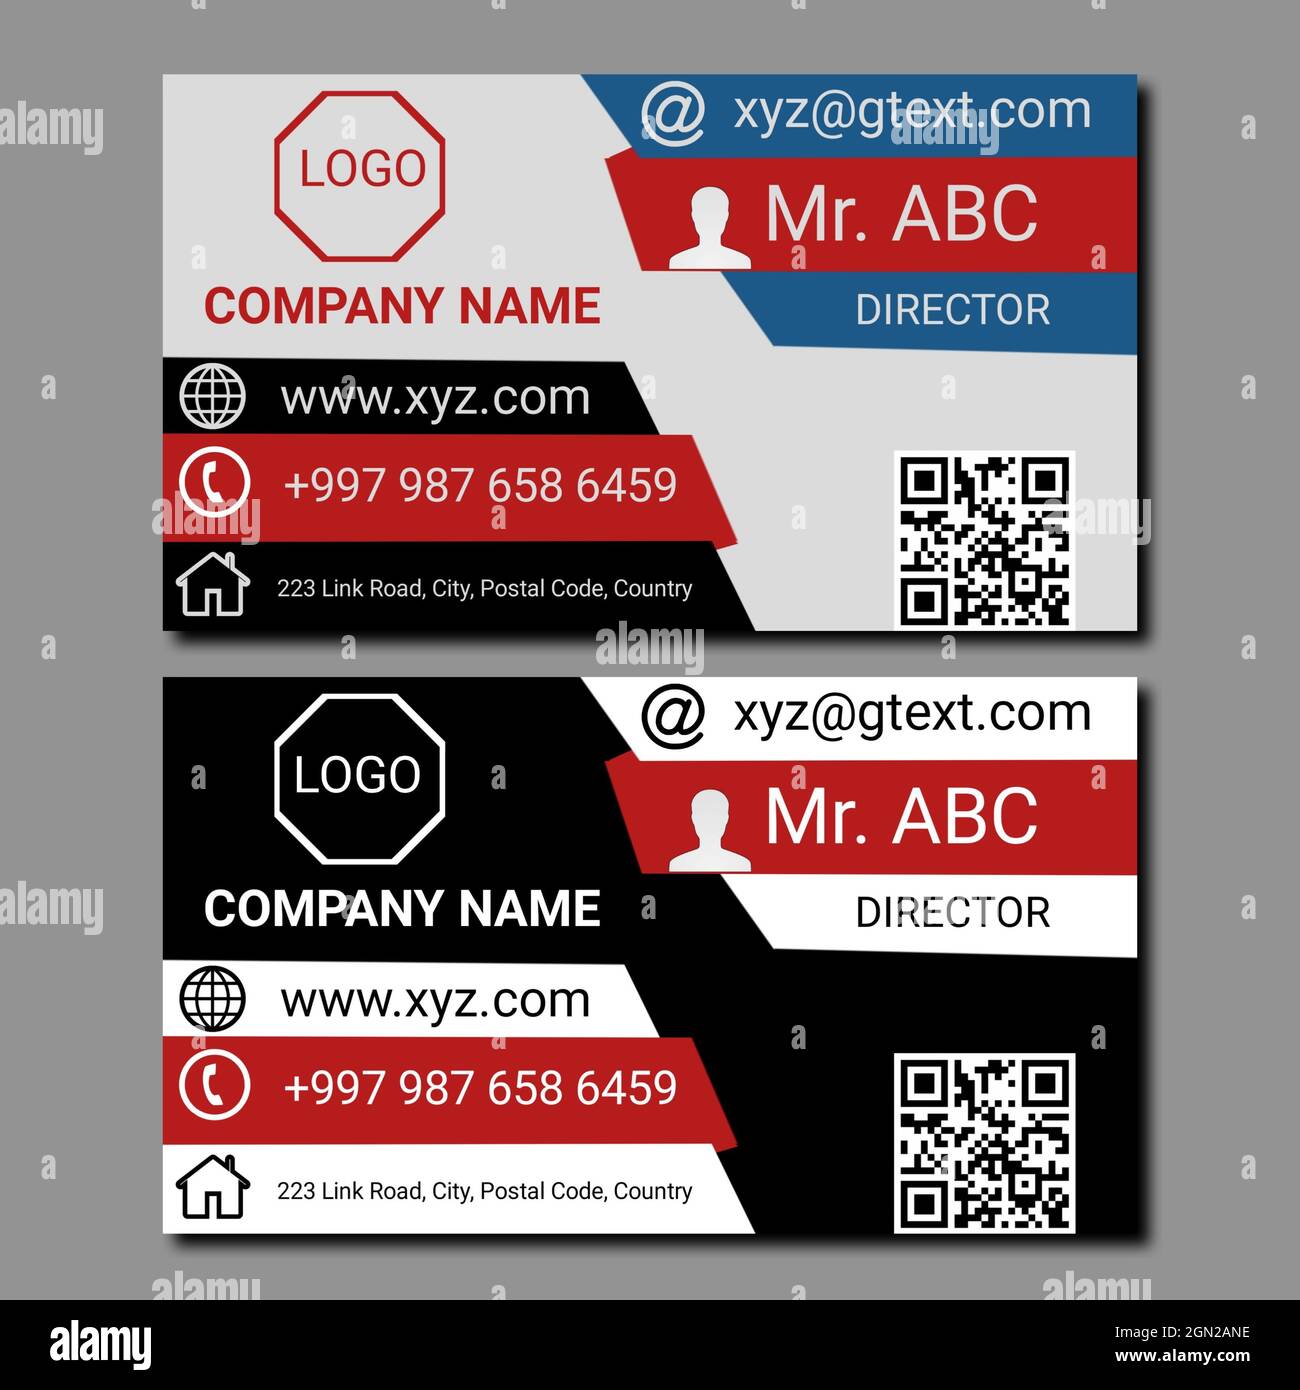 Professional business card template or visiting card set design for publishing, print and working or personal presentation Stock Photo